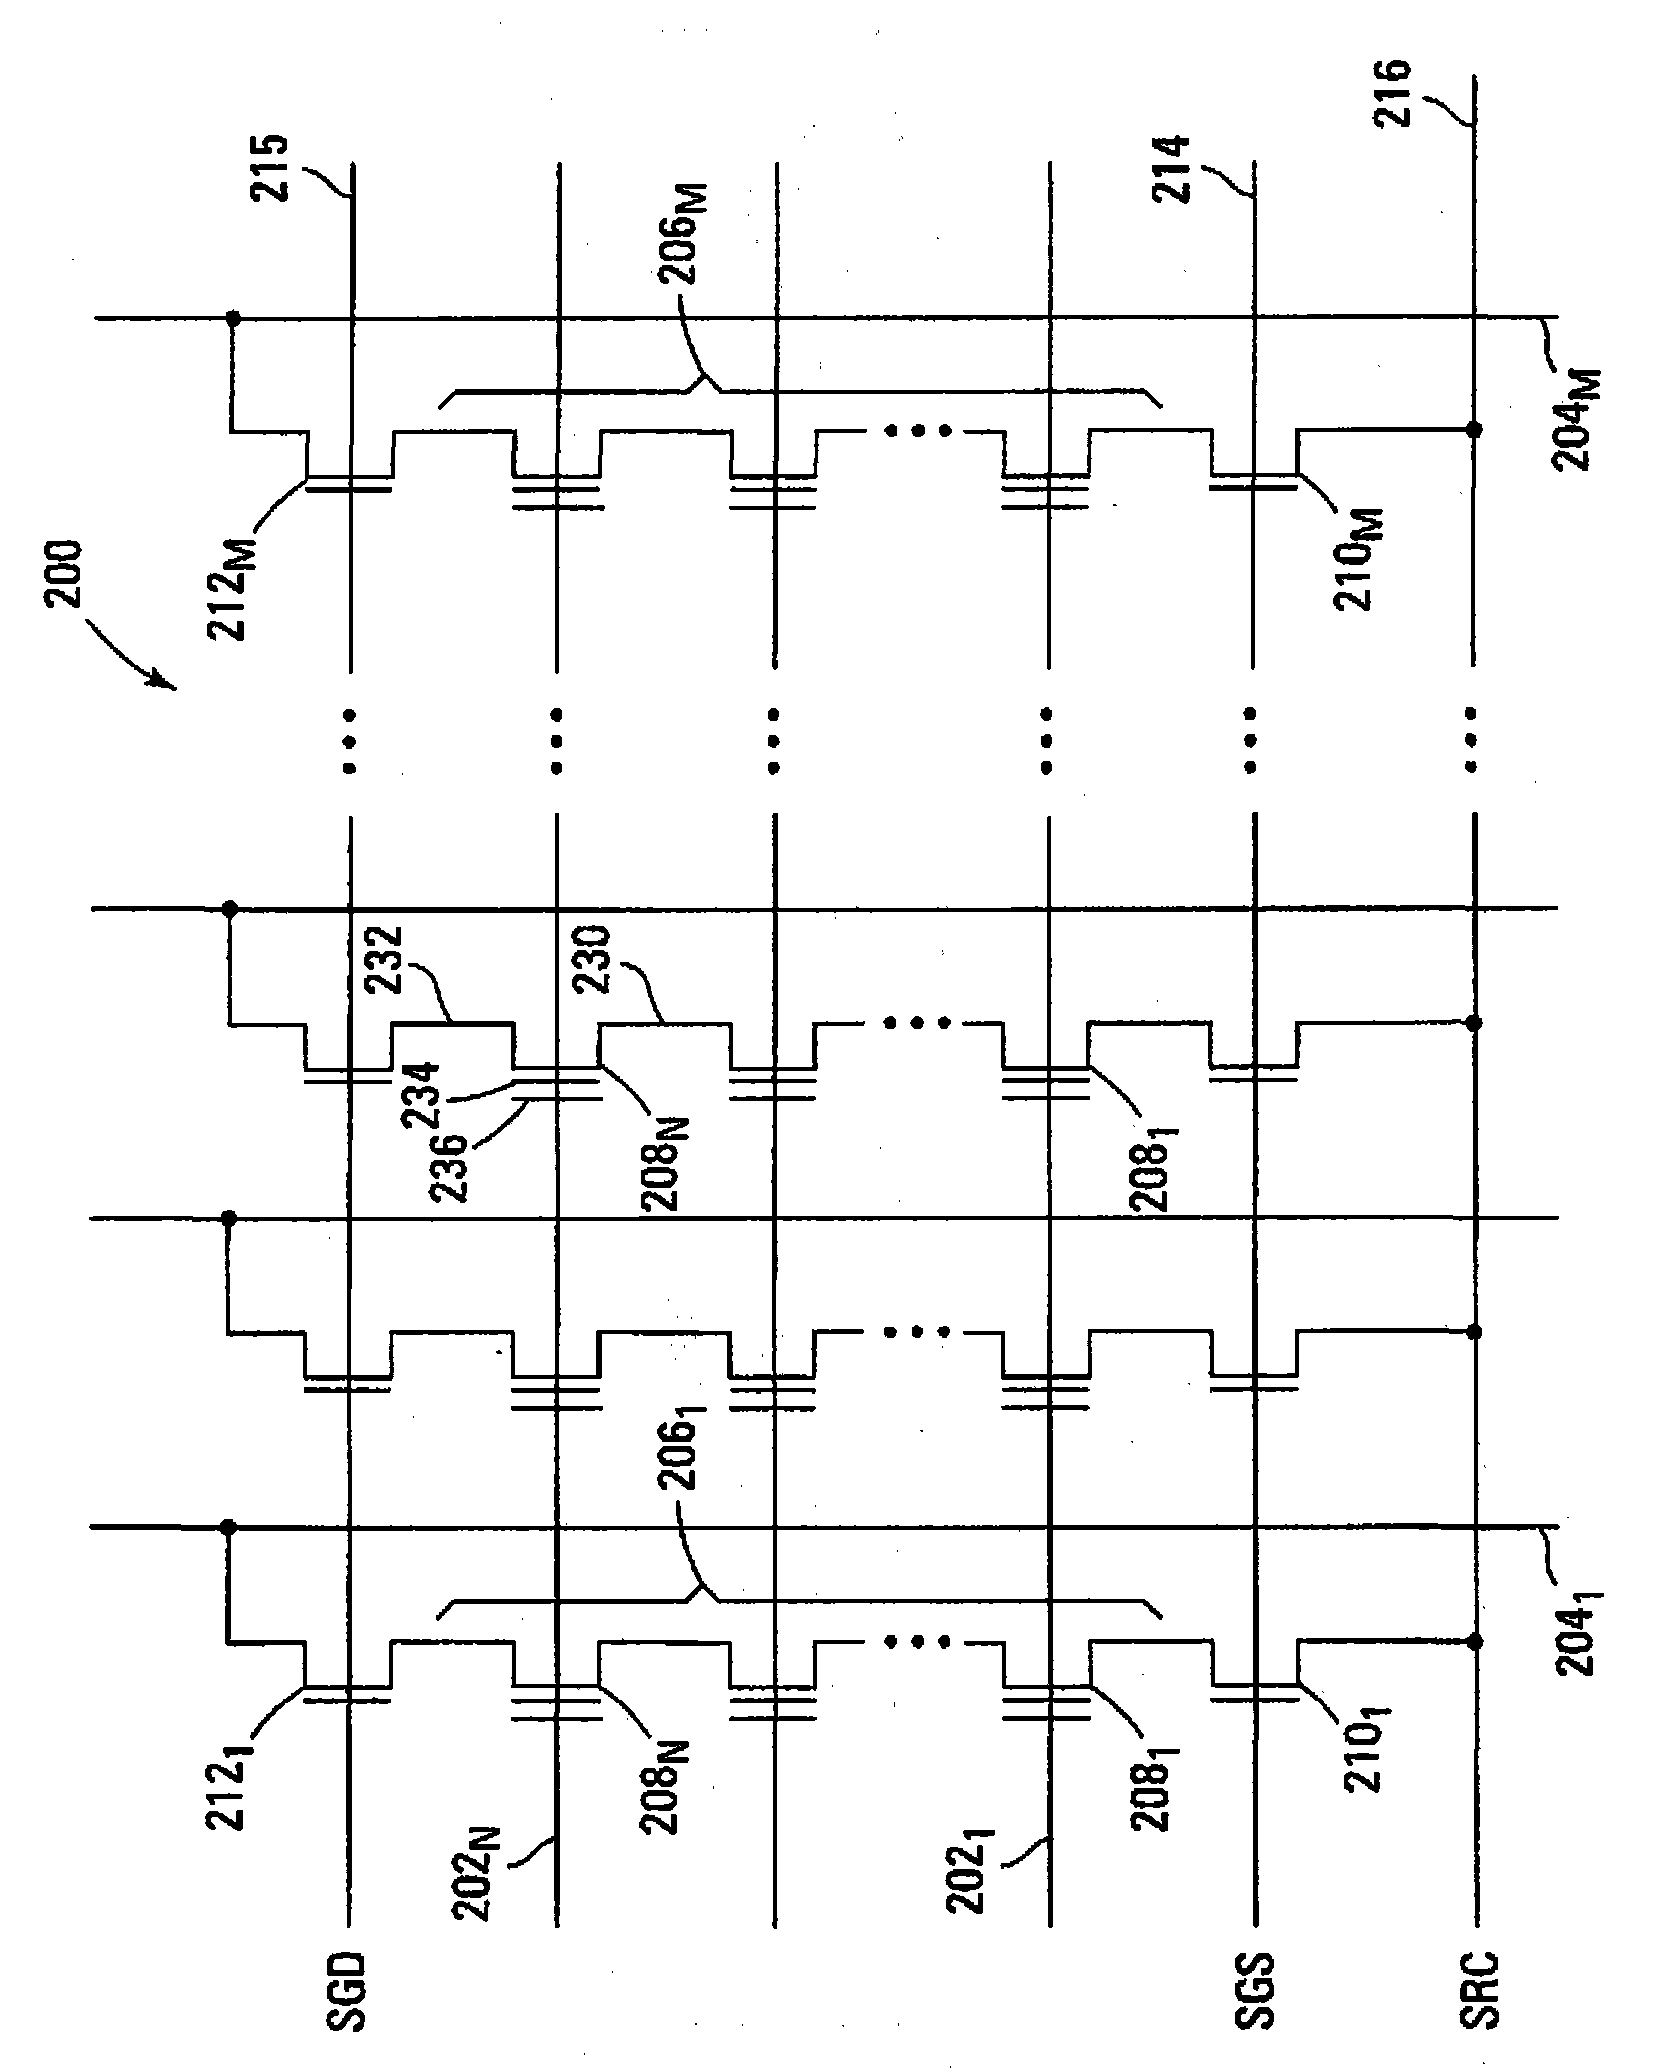 Memory controller self-calibration for removing systemic influence